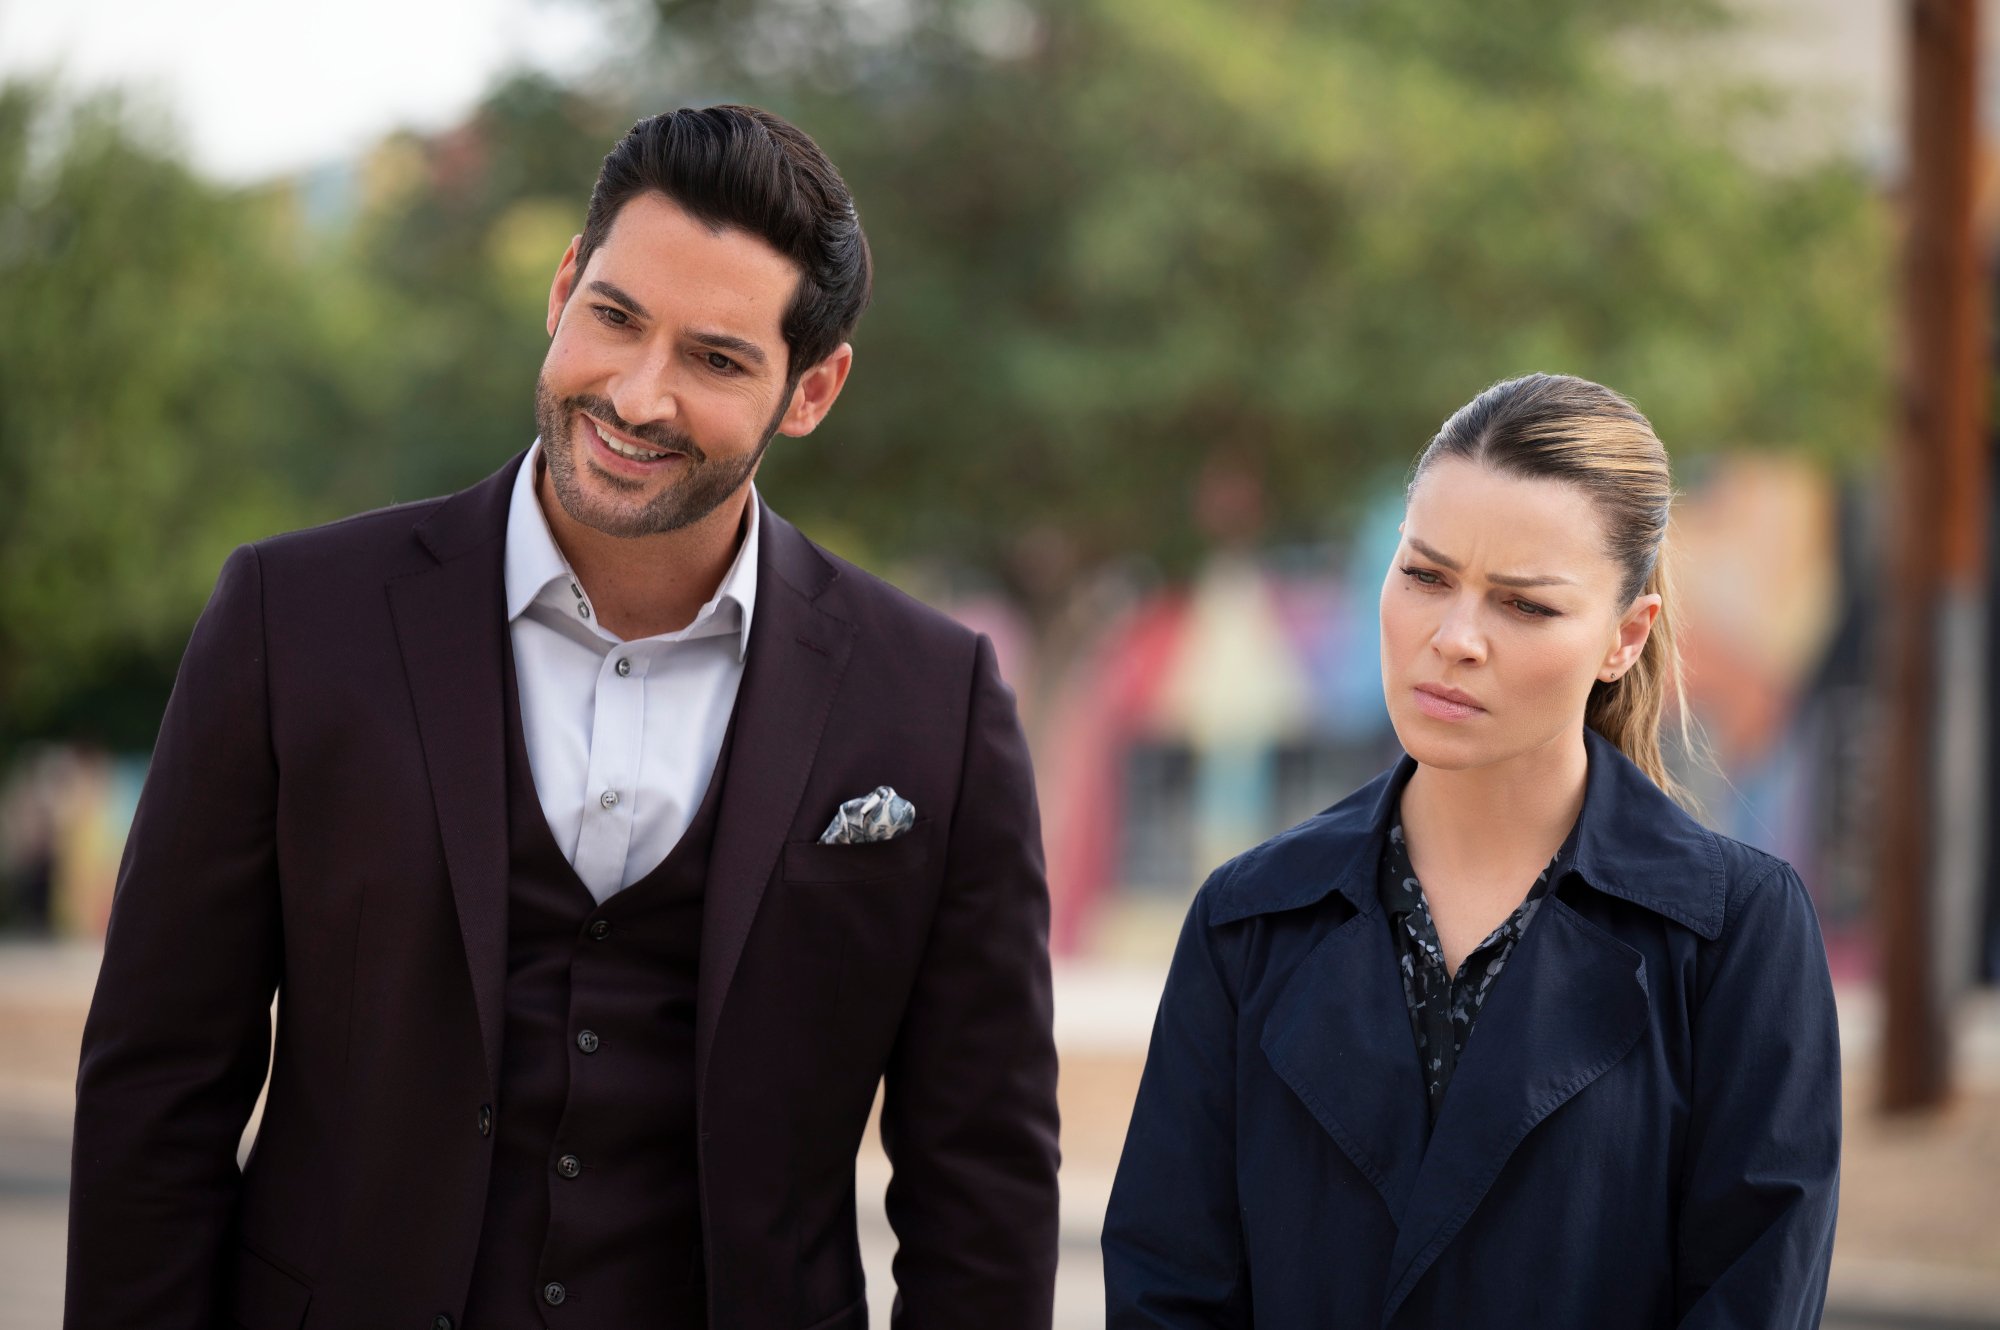 Tom Ellis and Lauren German in one of the episodes in 'Lucifer' Season 6. He's wearing a suit and smiling, and she has a concerned look on her face. 'Lucifer' originally was supposed to end with season 5.